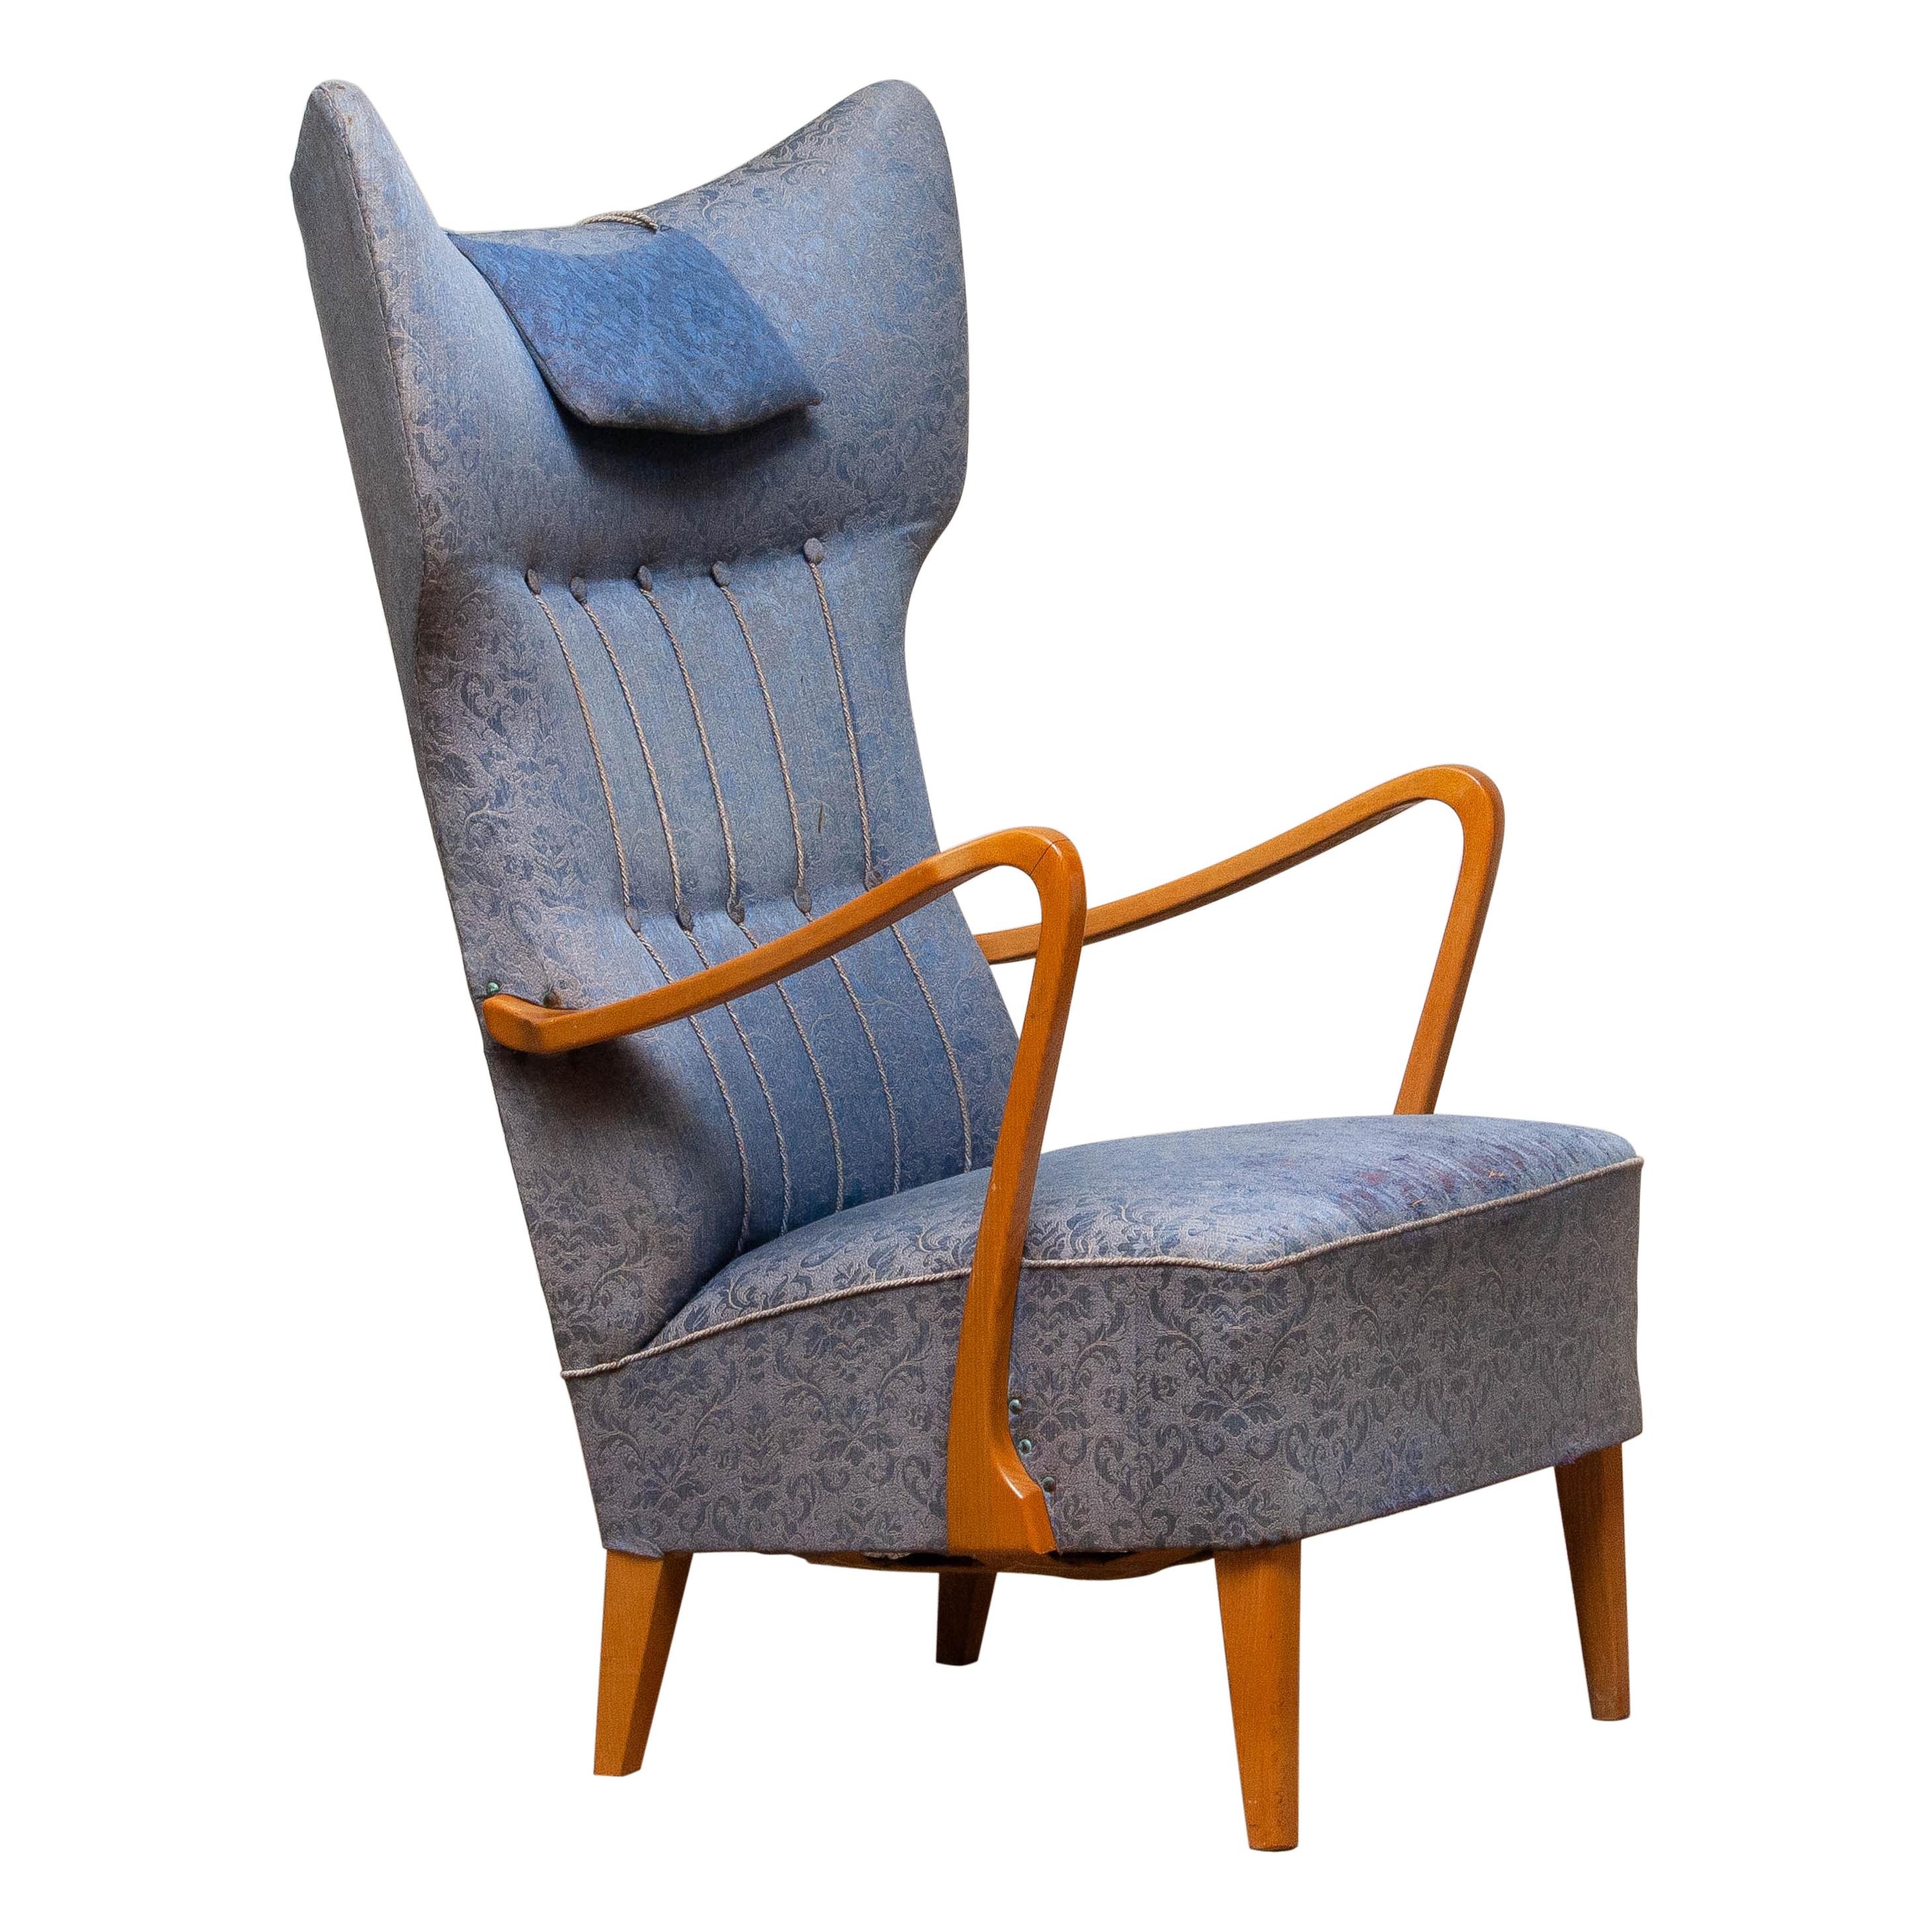 1920s, Slim Art Nouveau Swedish Wingback Chair in Oak with Extra High Backrest